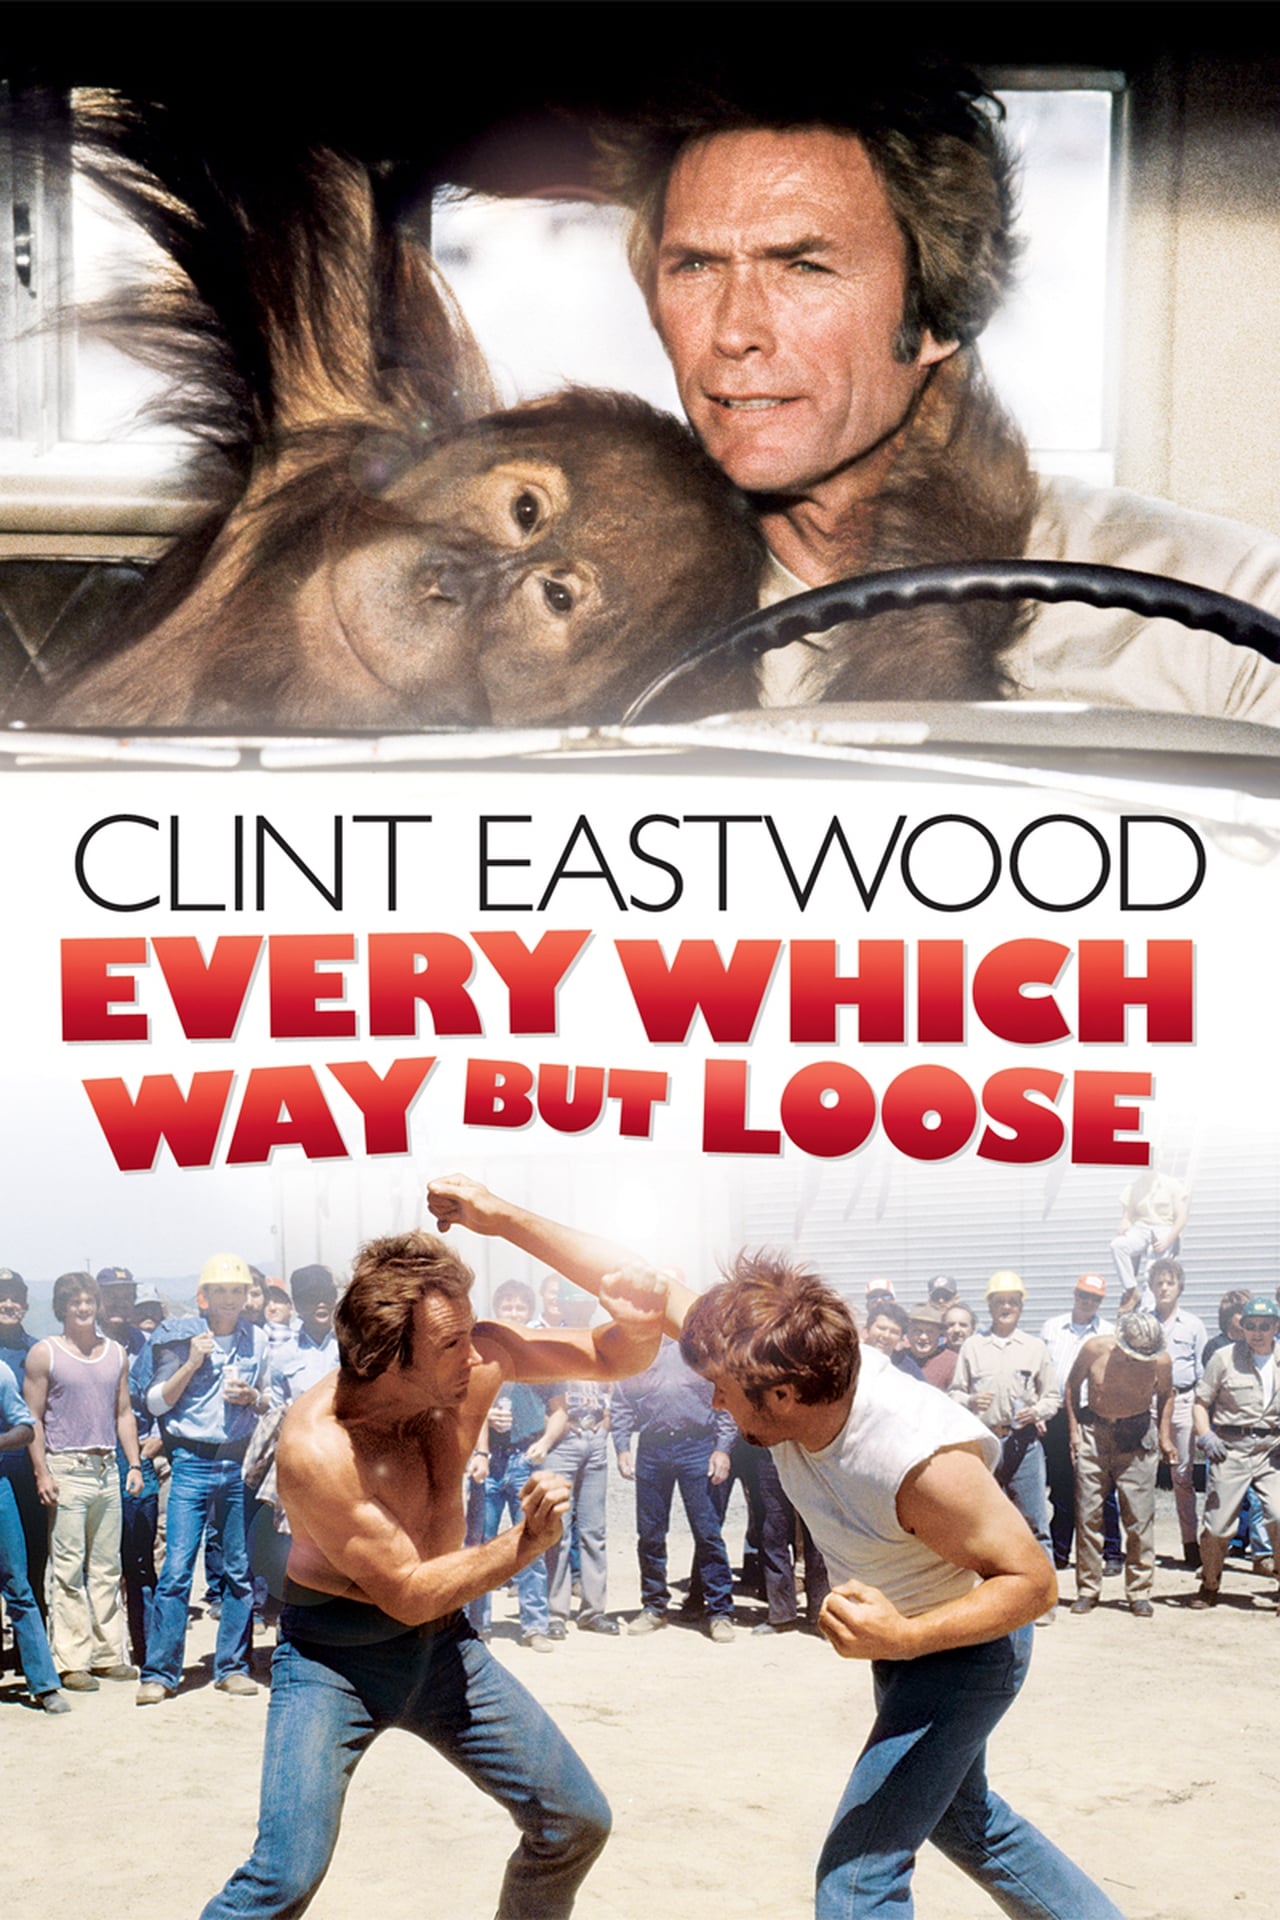 Every Which Way But Loose (1978) Cast: Then and Now